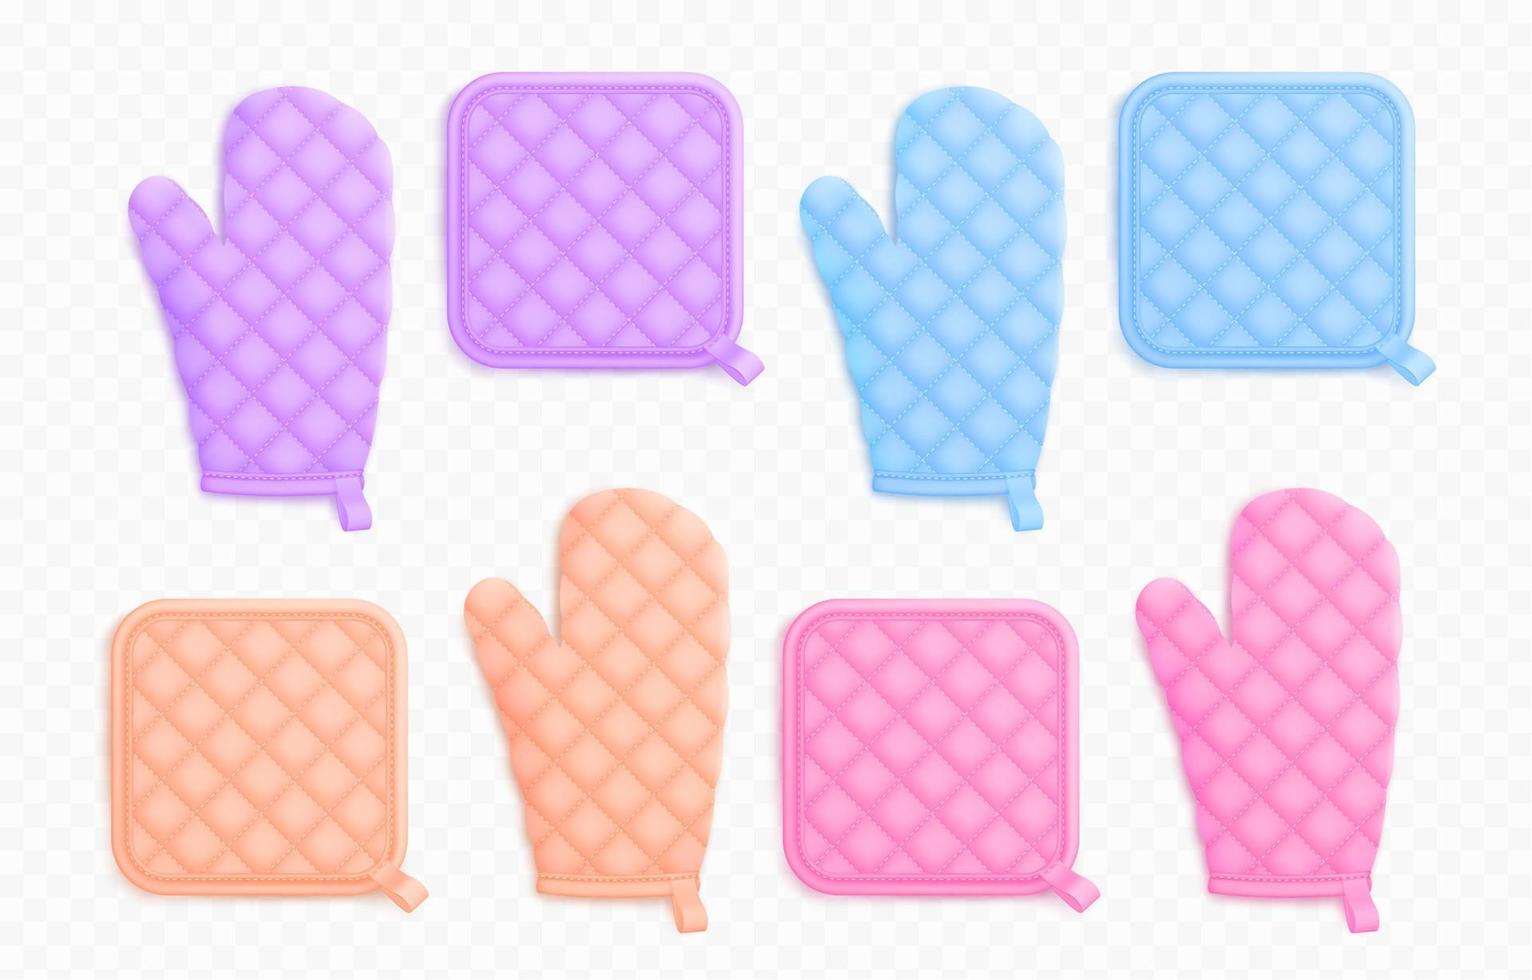 Kitchen mittens and potholders, oven mitts vector